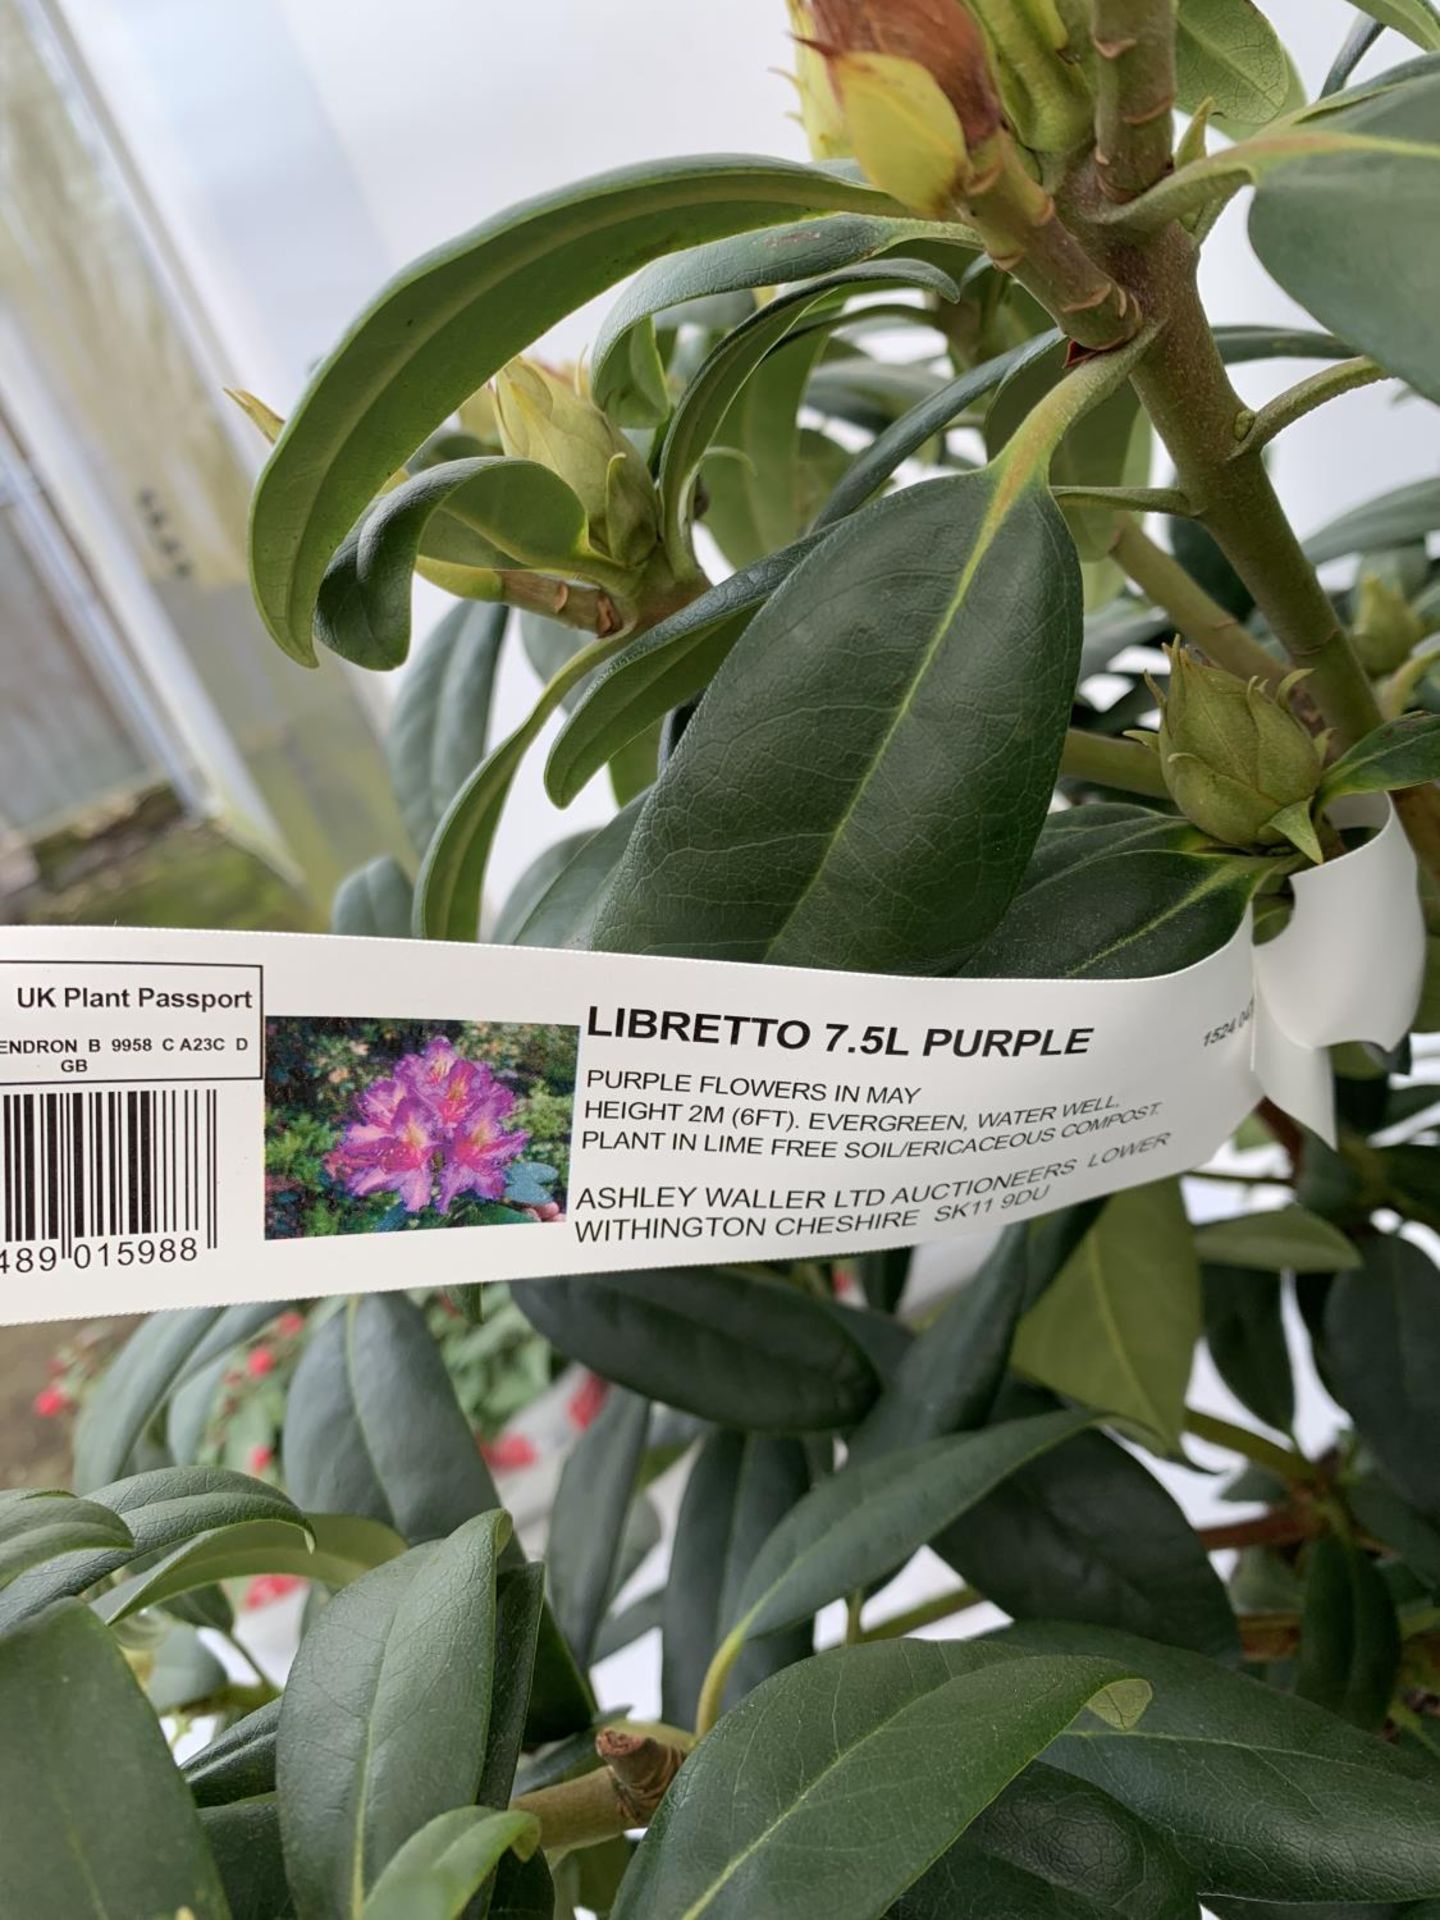 TWO LARGE RHODODENDRONS LIBRETTO PURPLE IN 7.5 LTR POTS APPROX 70CM IN HEIGHT PLUS VAT TO BE SOLD - Image 4 of 4